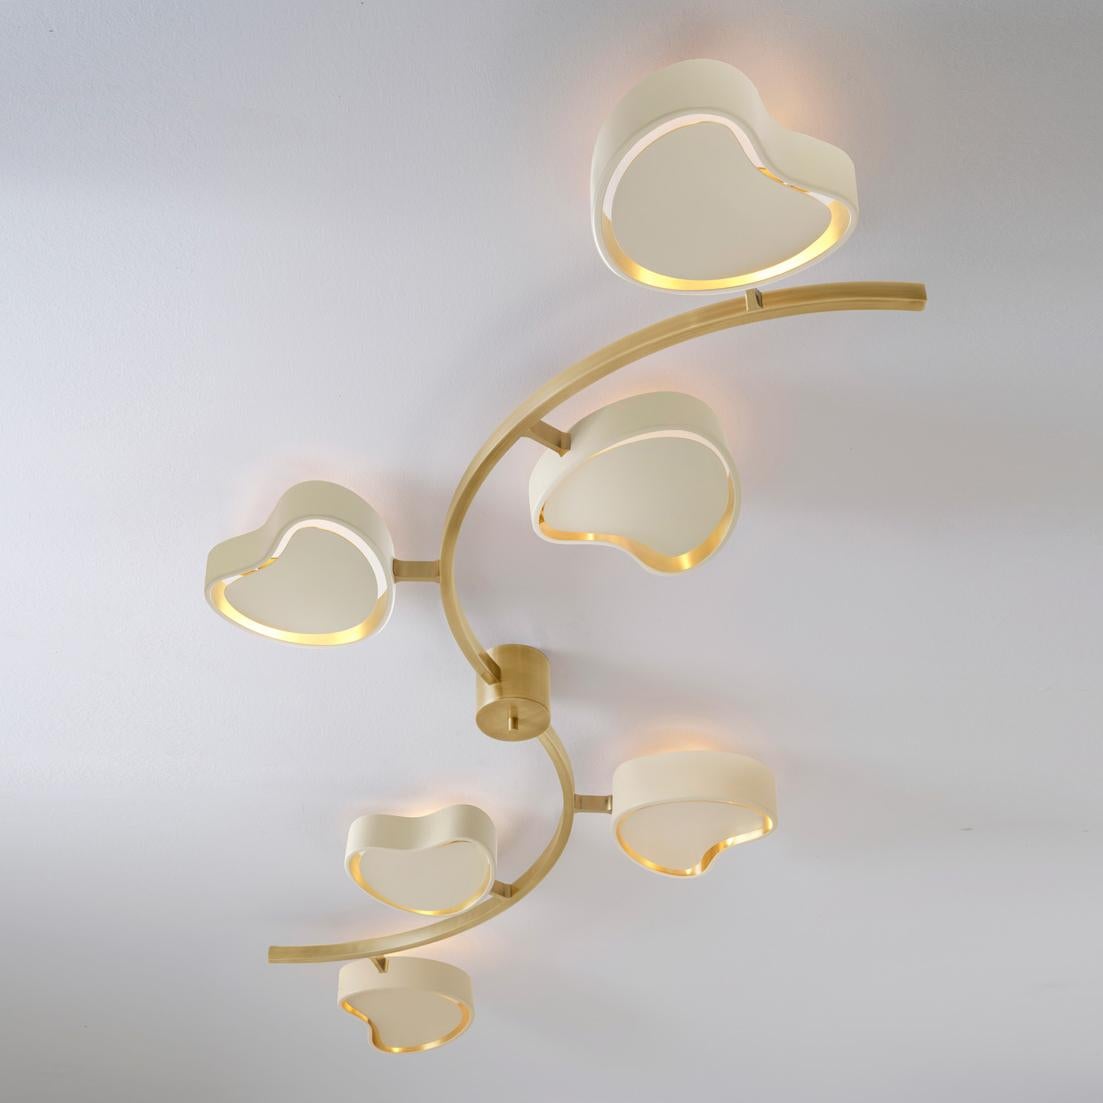 Contemporary Cuore N.6 Ceiling Light by Gaspare Asaro. Bronze and Satin Brass Finish For Sale